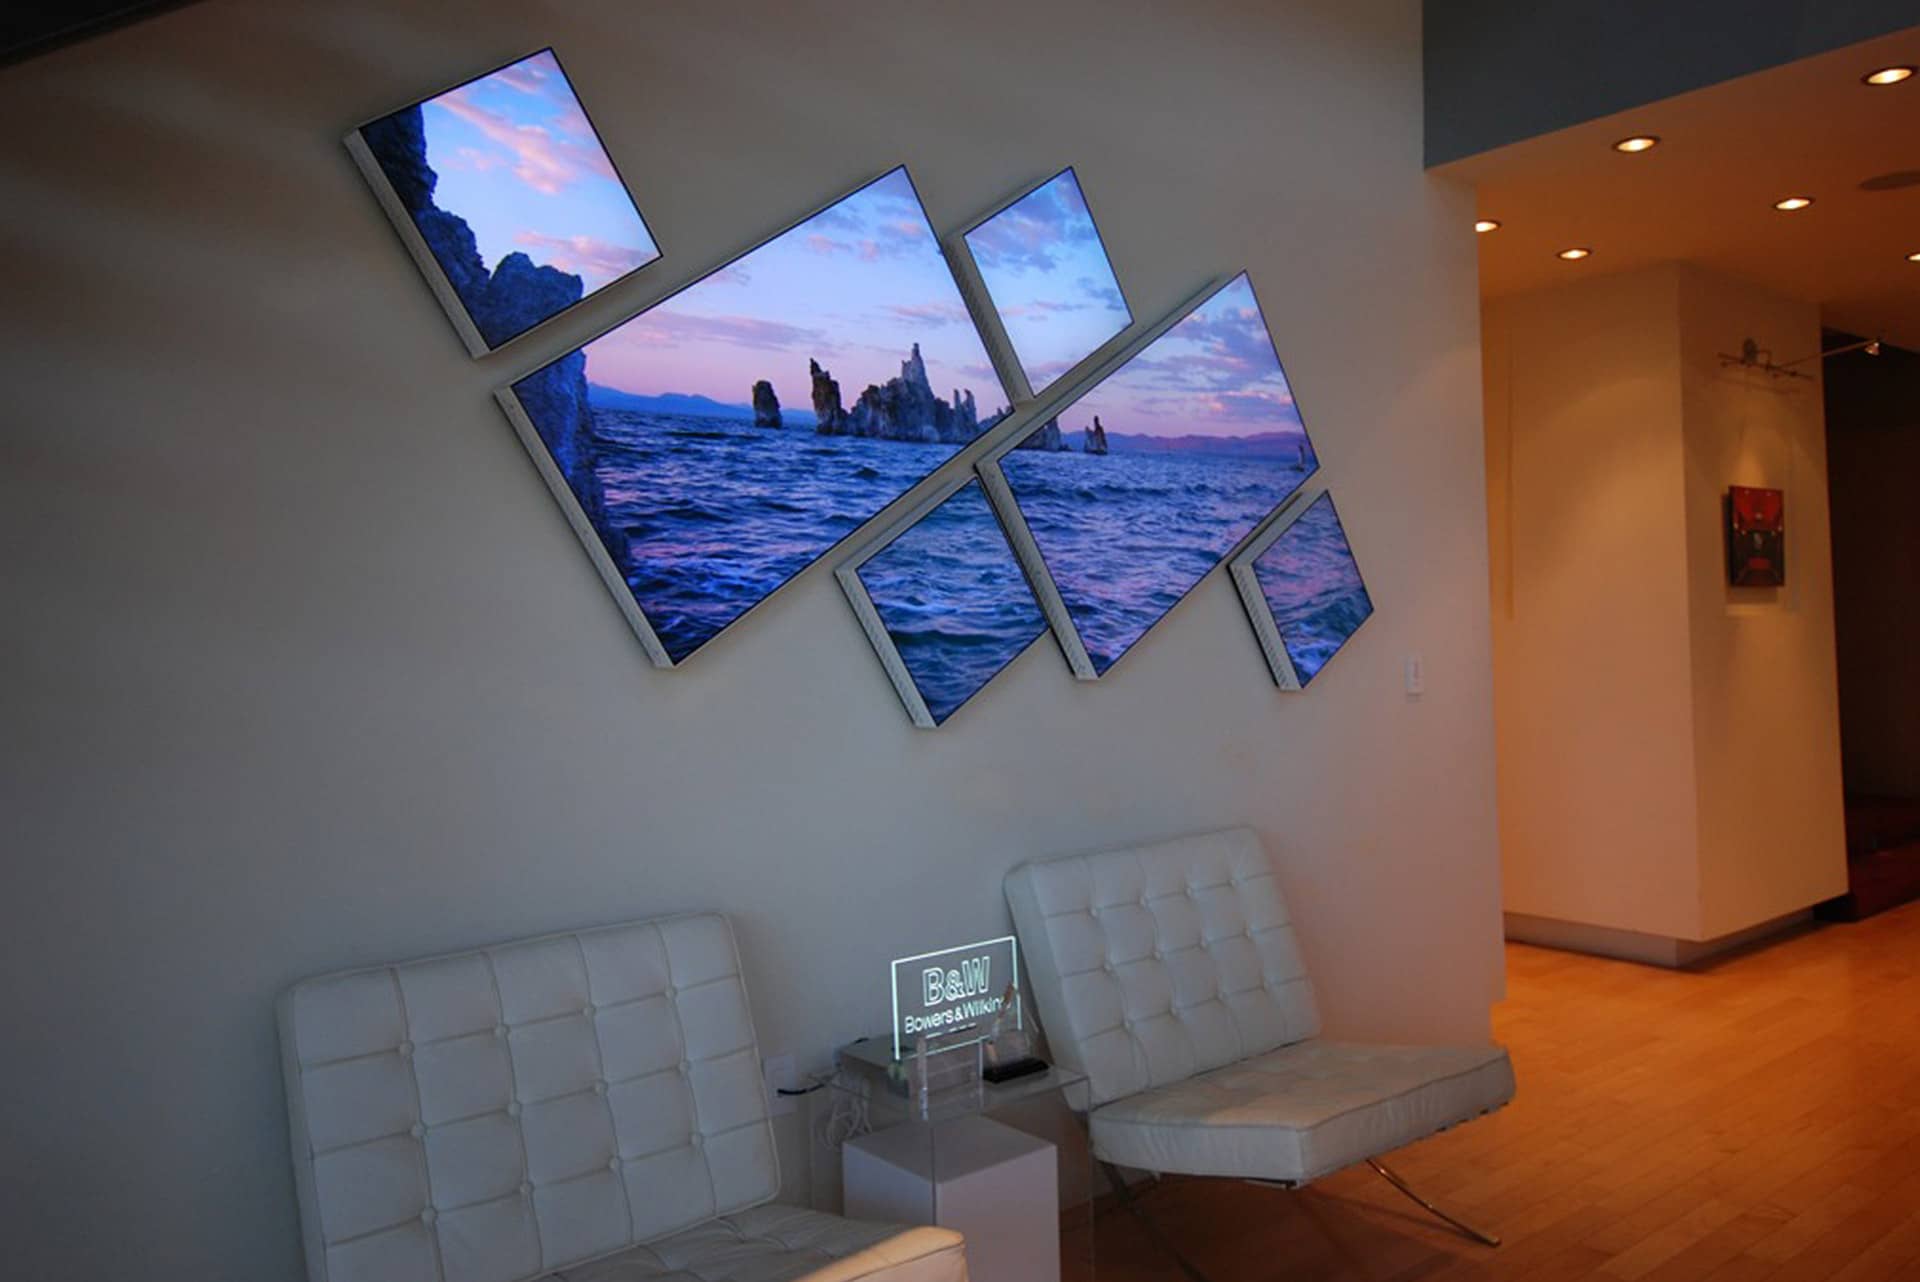 These LED Video Wall Panels are designed to look like a gallery wall - video walls can be used for image and signage display or for entertainment purposes